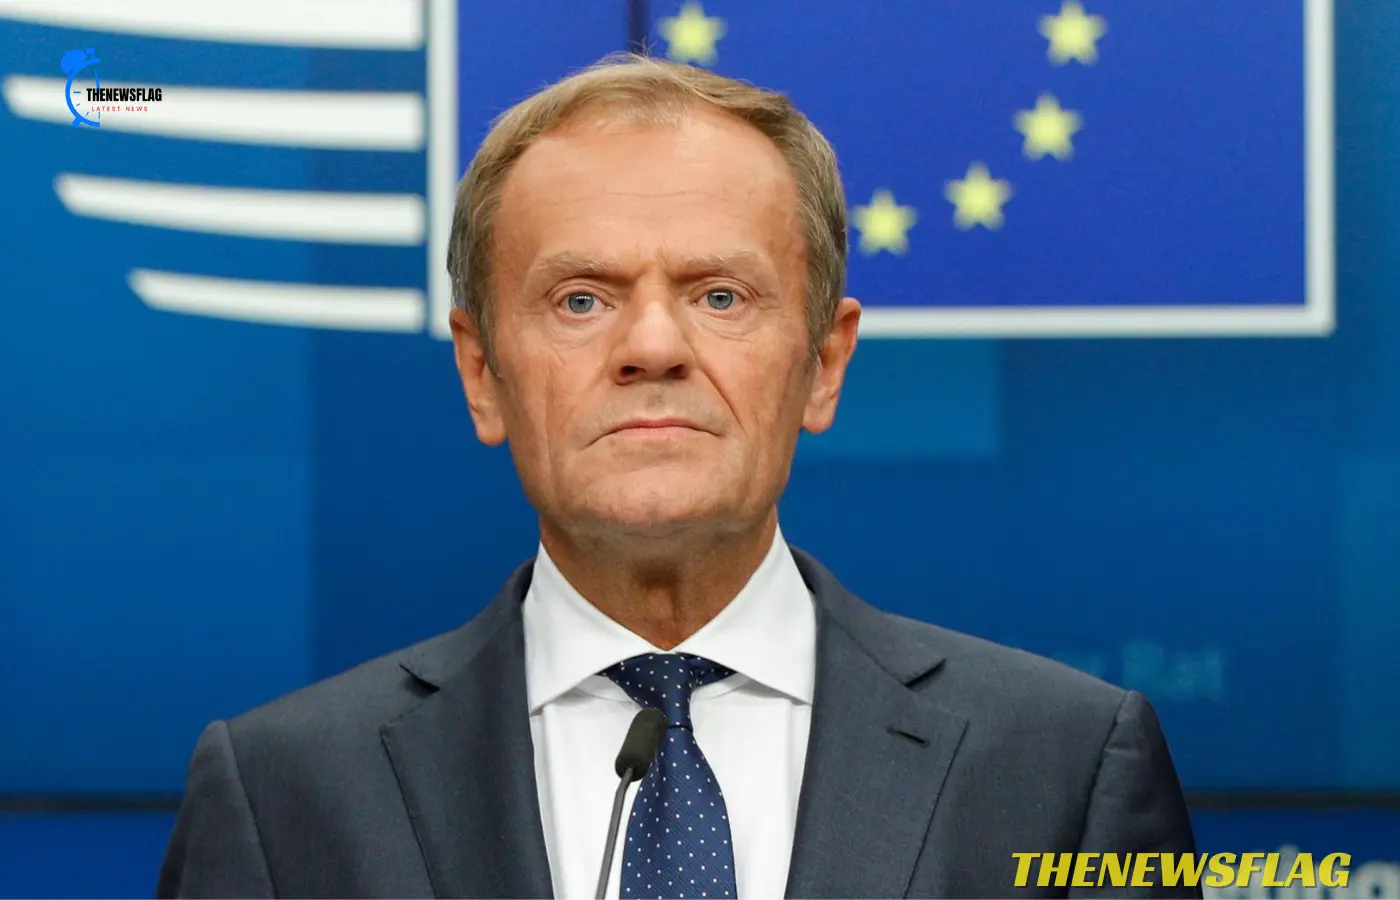 Donald Tusk, the prime minister of Poland, calls war in Europe "a real threat."